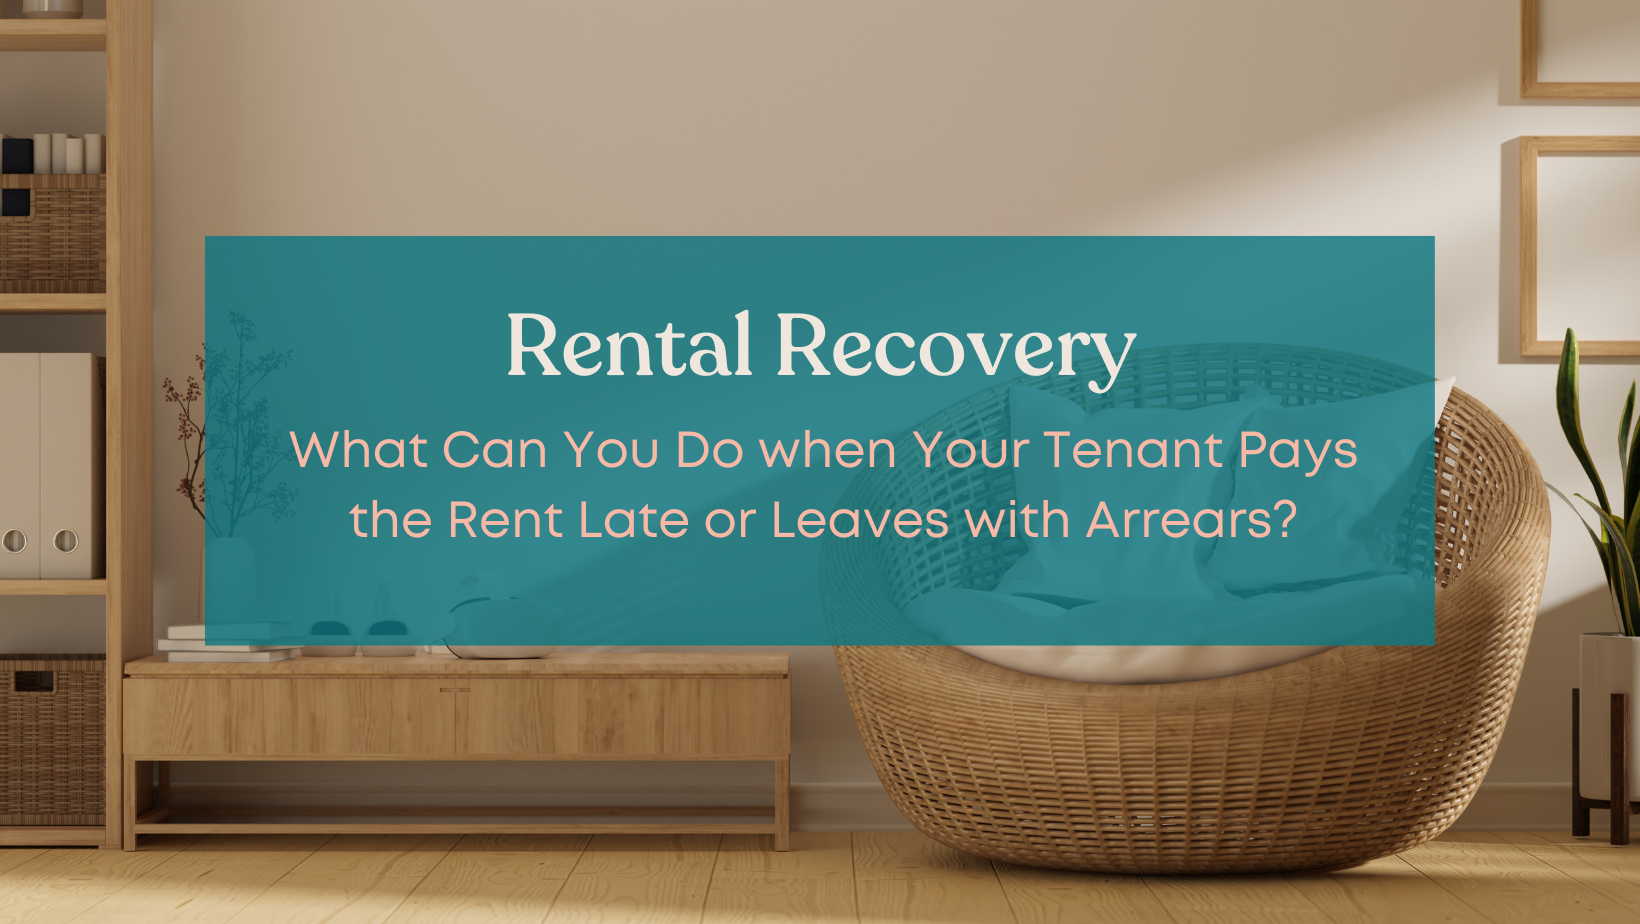 Recovering your rental property